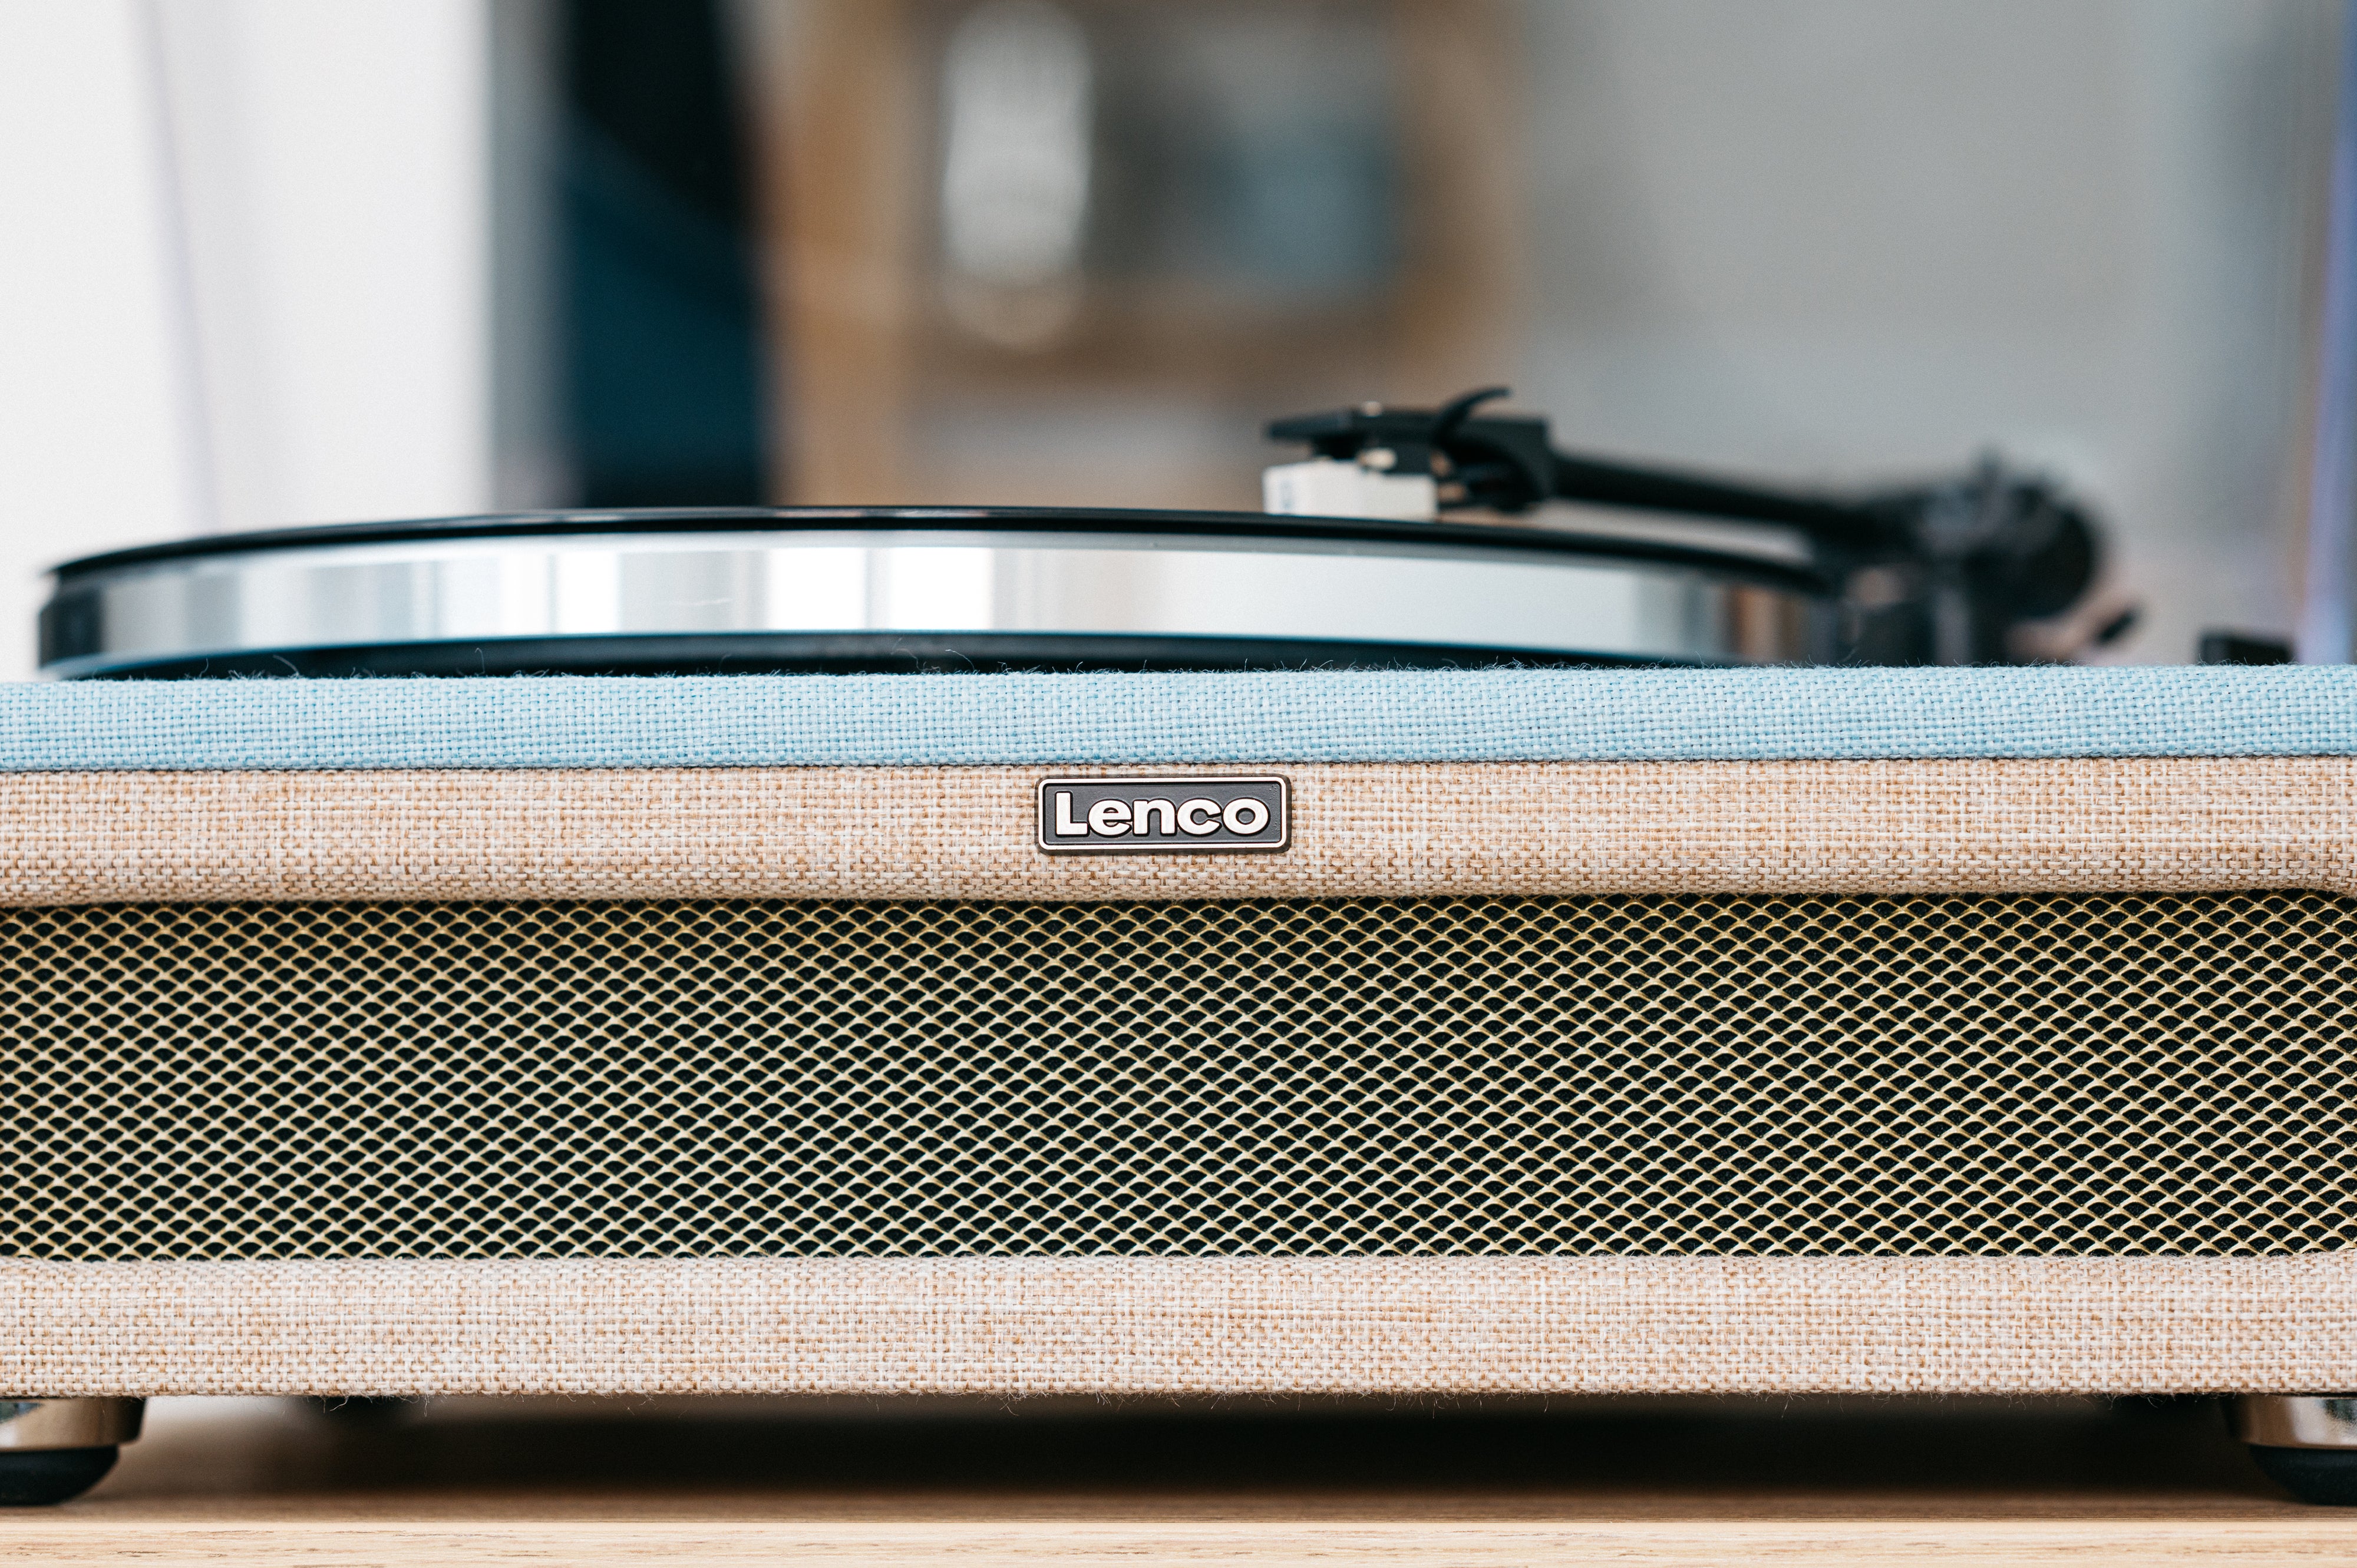 LENCO LS-440BUBG - Turntable with 4 built-in speakers - Fabric